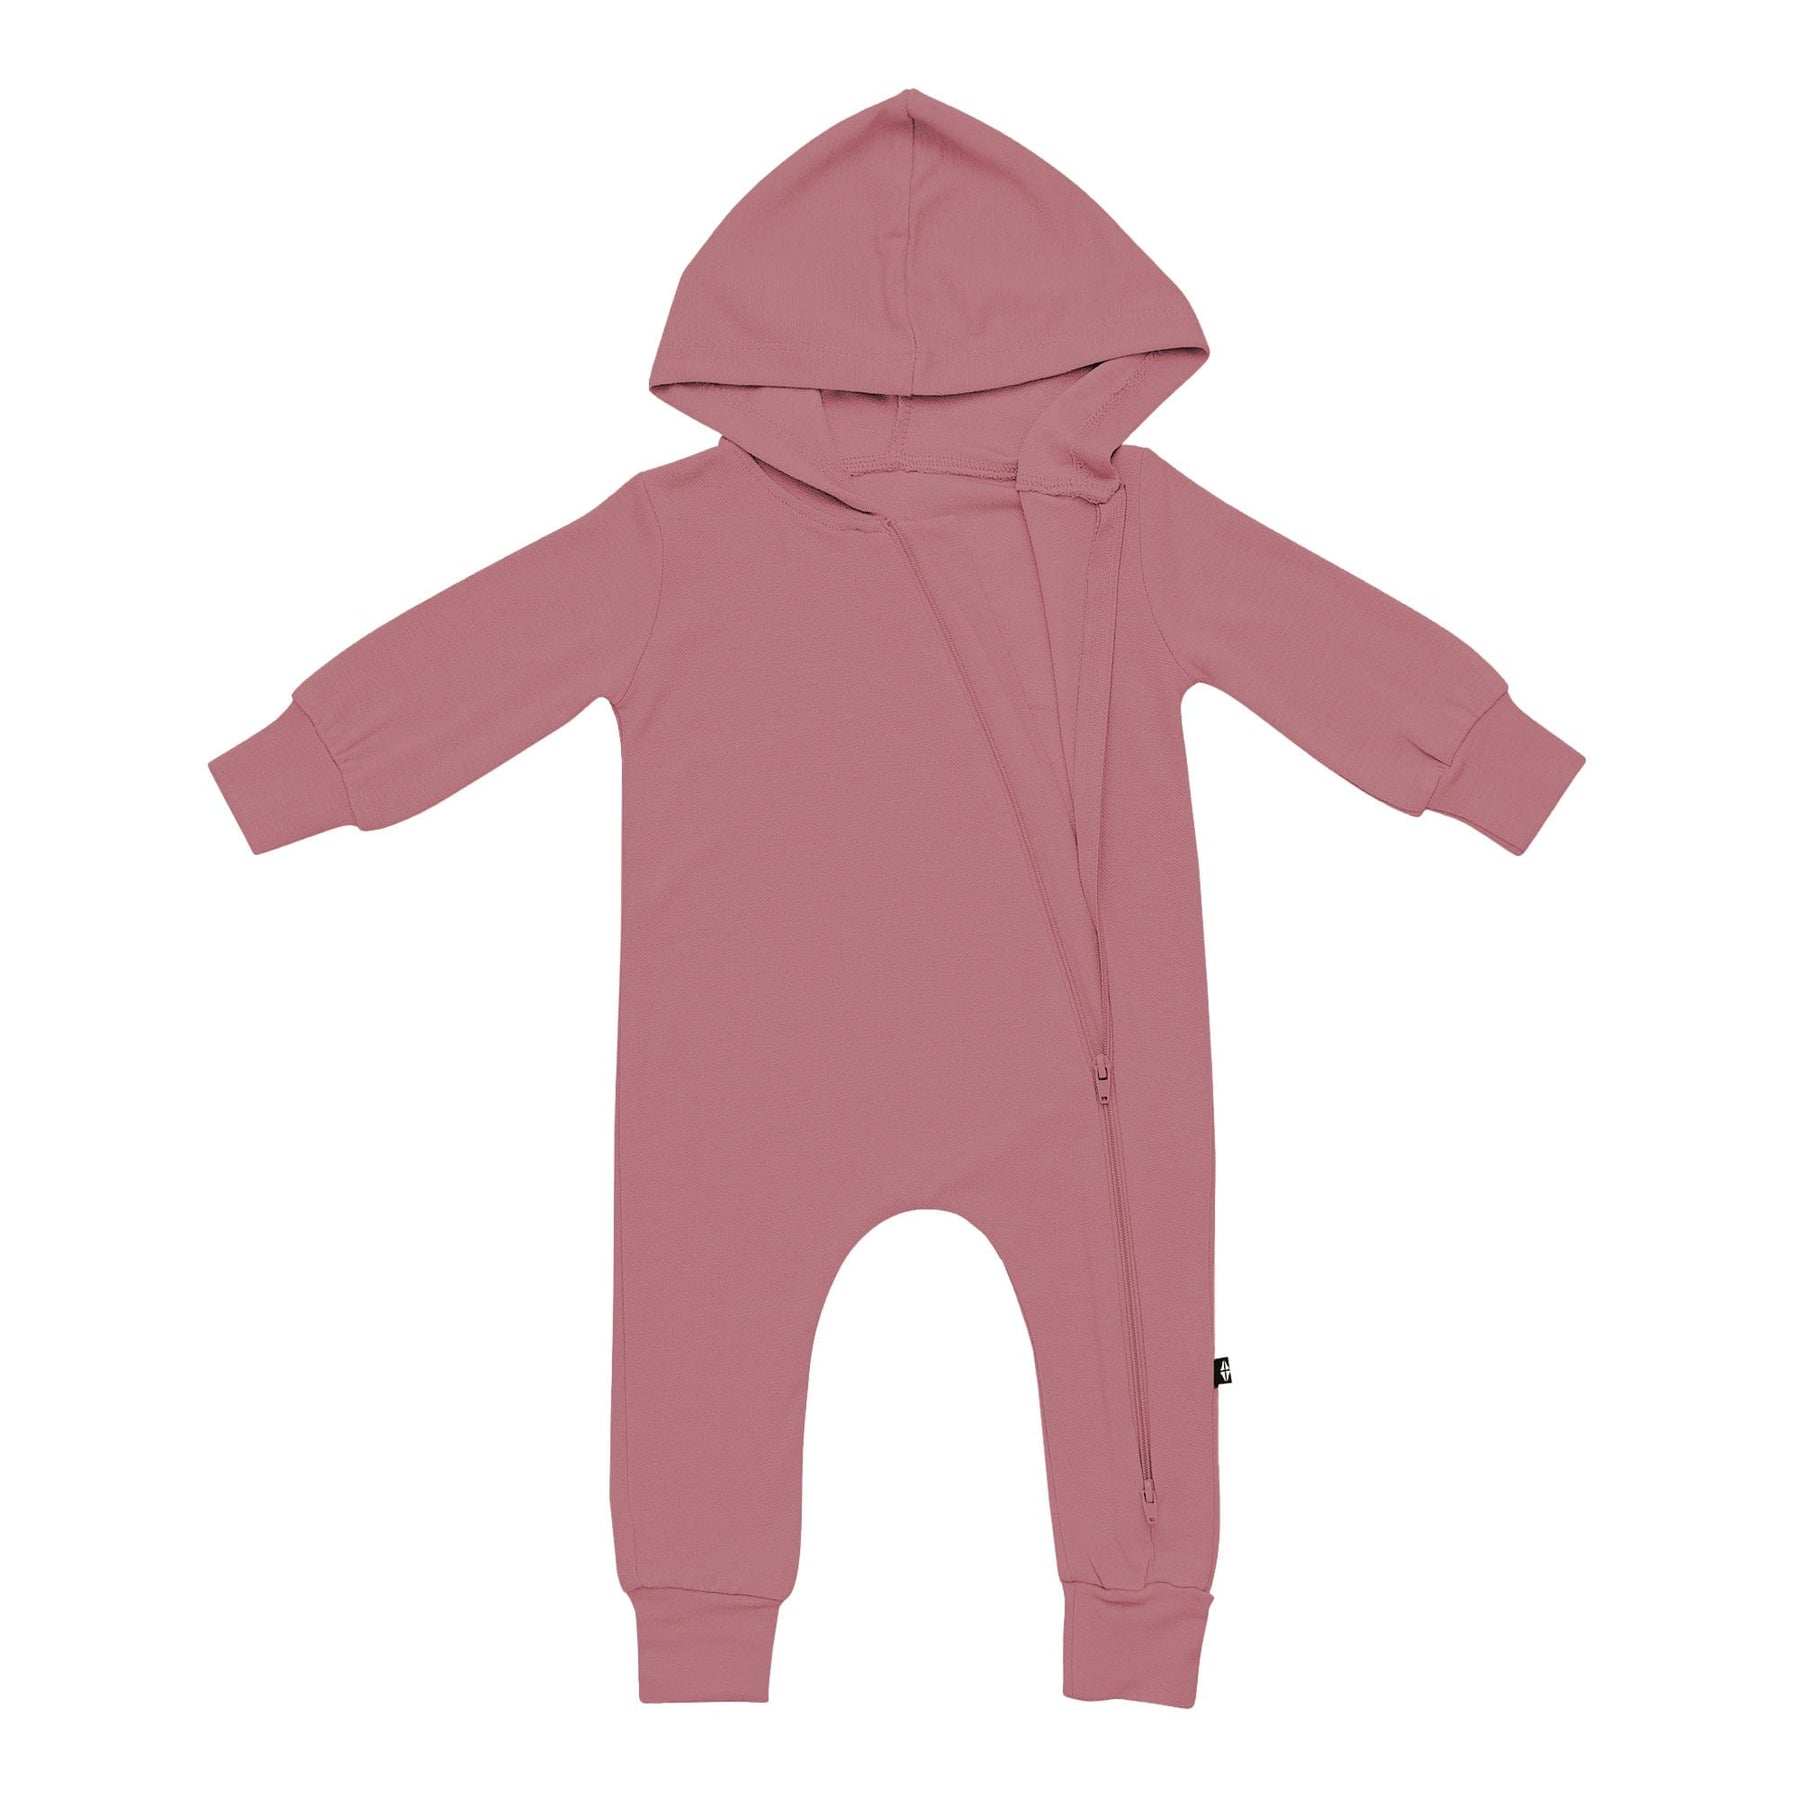 Kyte Baby Hooded Zippered Romper Bamboo Jersey Hooded Zippered Romper in Dusty Rose